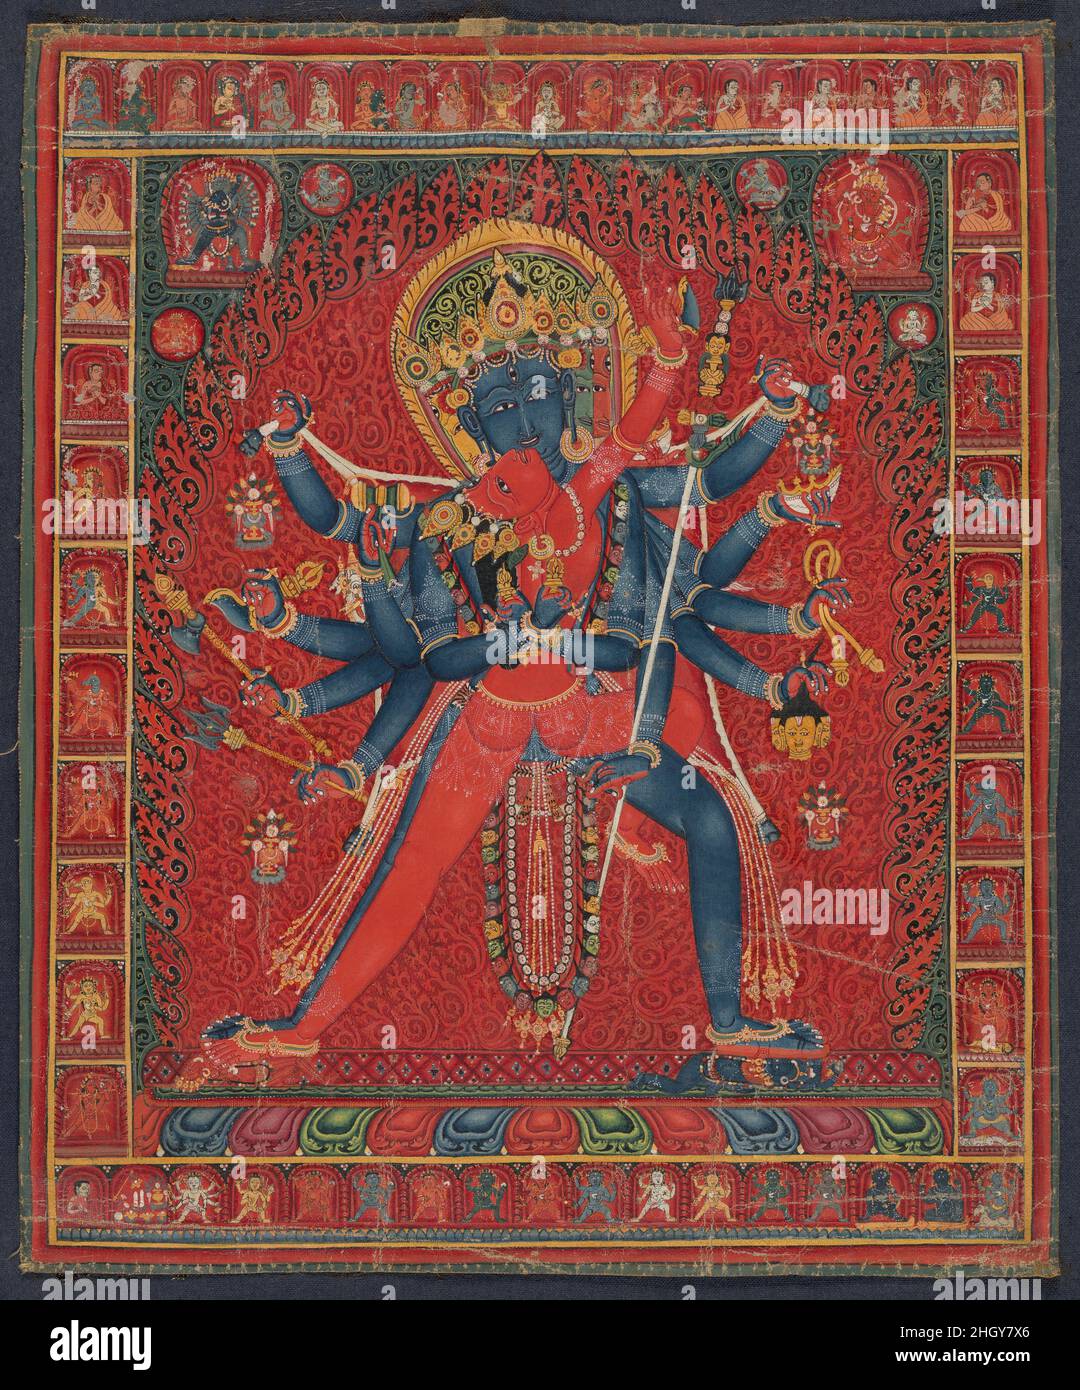 Chakrasamvara and consort Vajravarahi 1450–1500 Central Tibet This powerful depiction of Chakrasamvara embracing his yogini consort Vajravarahi is a highly energized visualization, such as would have been experienced by an advanced tantric master. These are key deities in the Vajrayana system, uniting two of the most powerful ideas in esoteric Buddhism, wisdom, embodied in Vajravarahi, and compassion, the essence of Chakrasamvara. His name, which translates as Circle of Bliss, embodies the powerful union of these two fundamentals tenets of Buddhism. This is arguably one of the finest represent Stock Photo